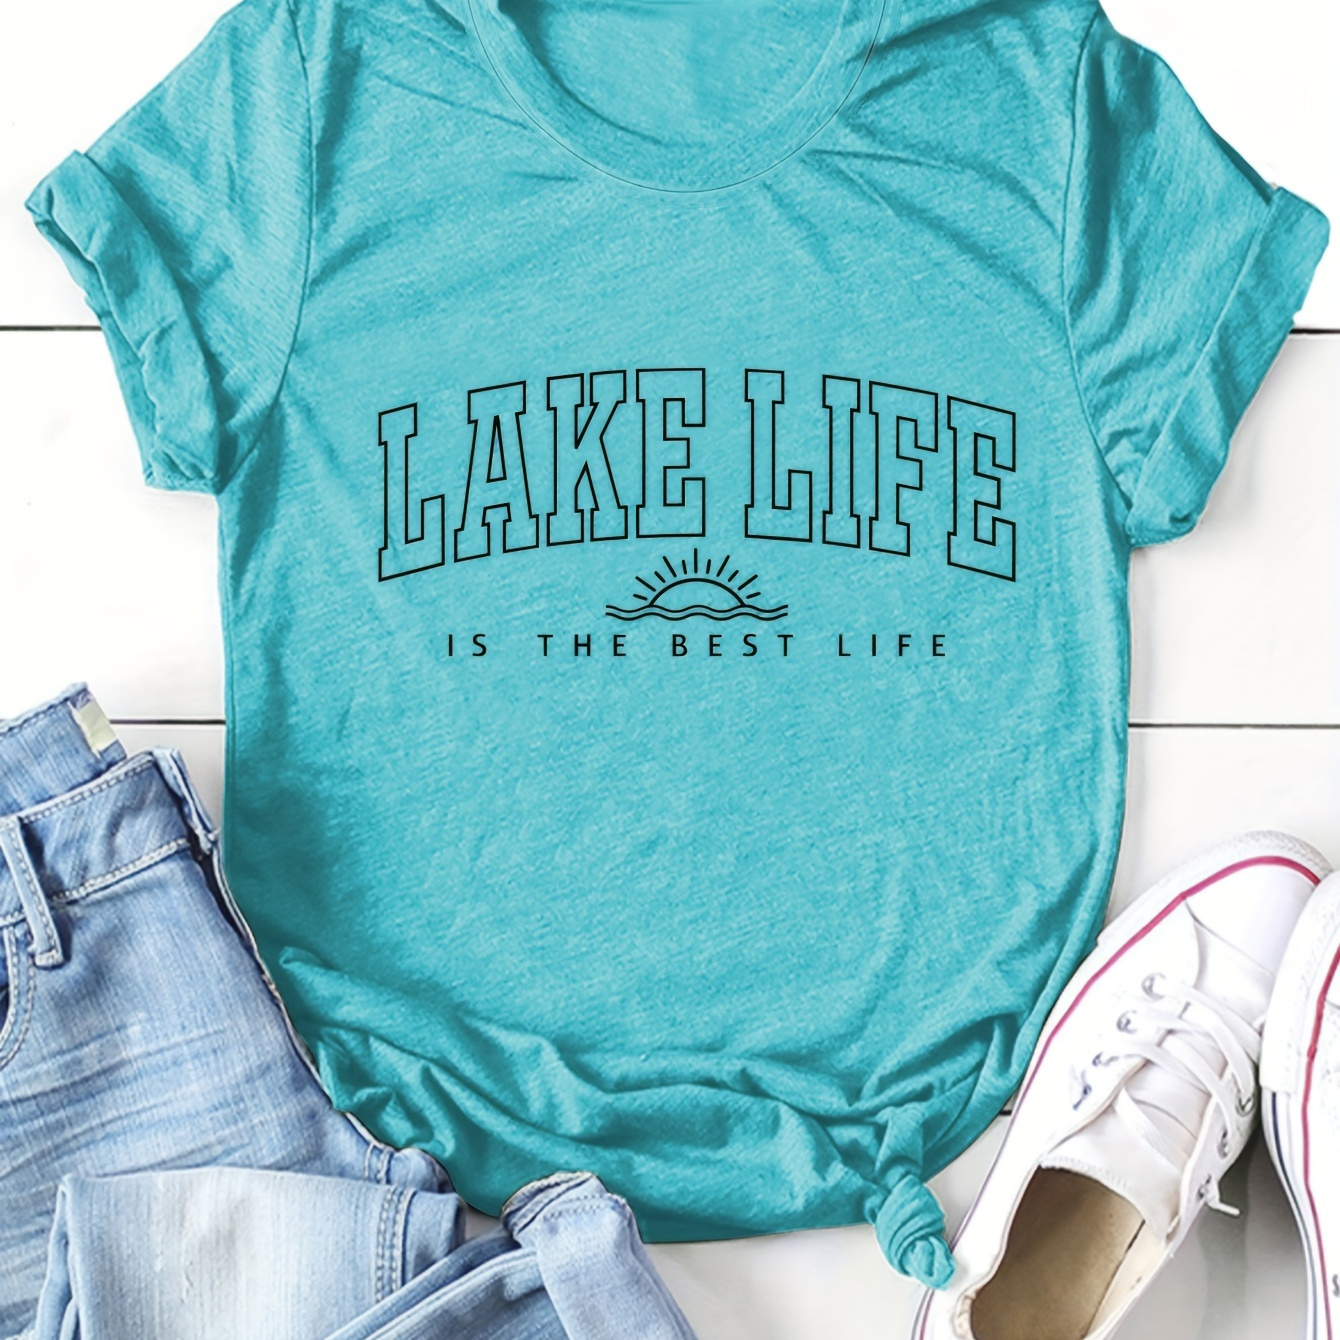 

Lake Life Is The Beat Print Crew Neck T-shirt, Short Sleeve Casual Top For Spring & Summer, Women's Clothing